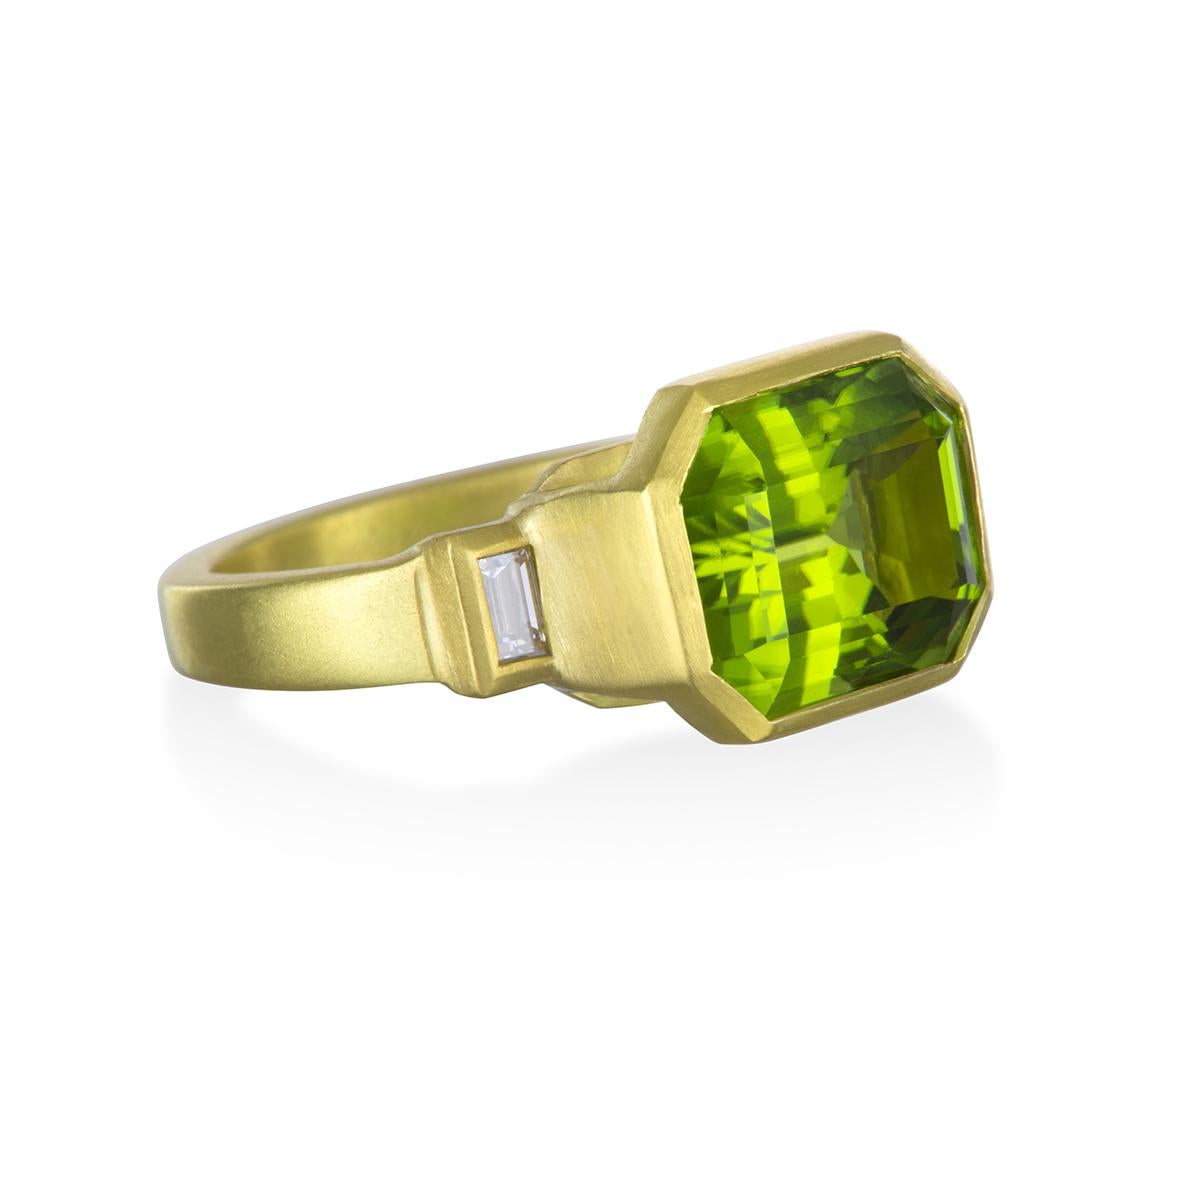 Faye Kim 18k gold modified Emerald-cut Peridot ring with side diamond baguettes.  The main source of Peridot in the ancient world was Topazo Island (now St. John's Island) in the Egyptian Red Sea.  The vivid green color pairs beautifully with the